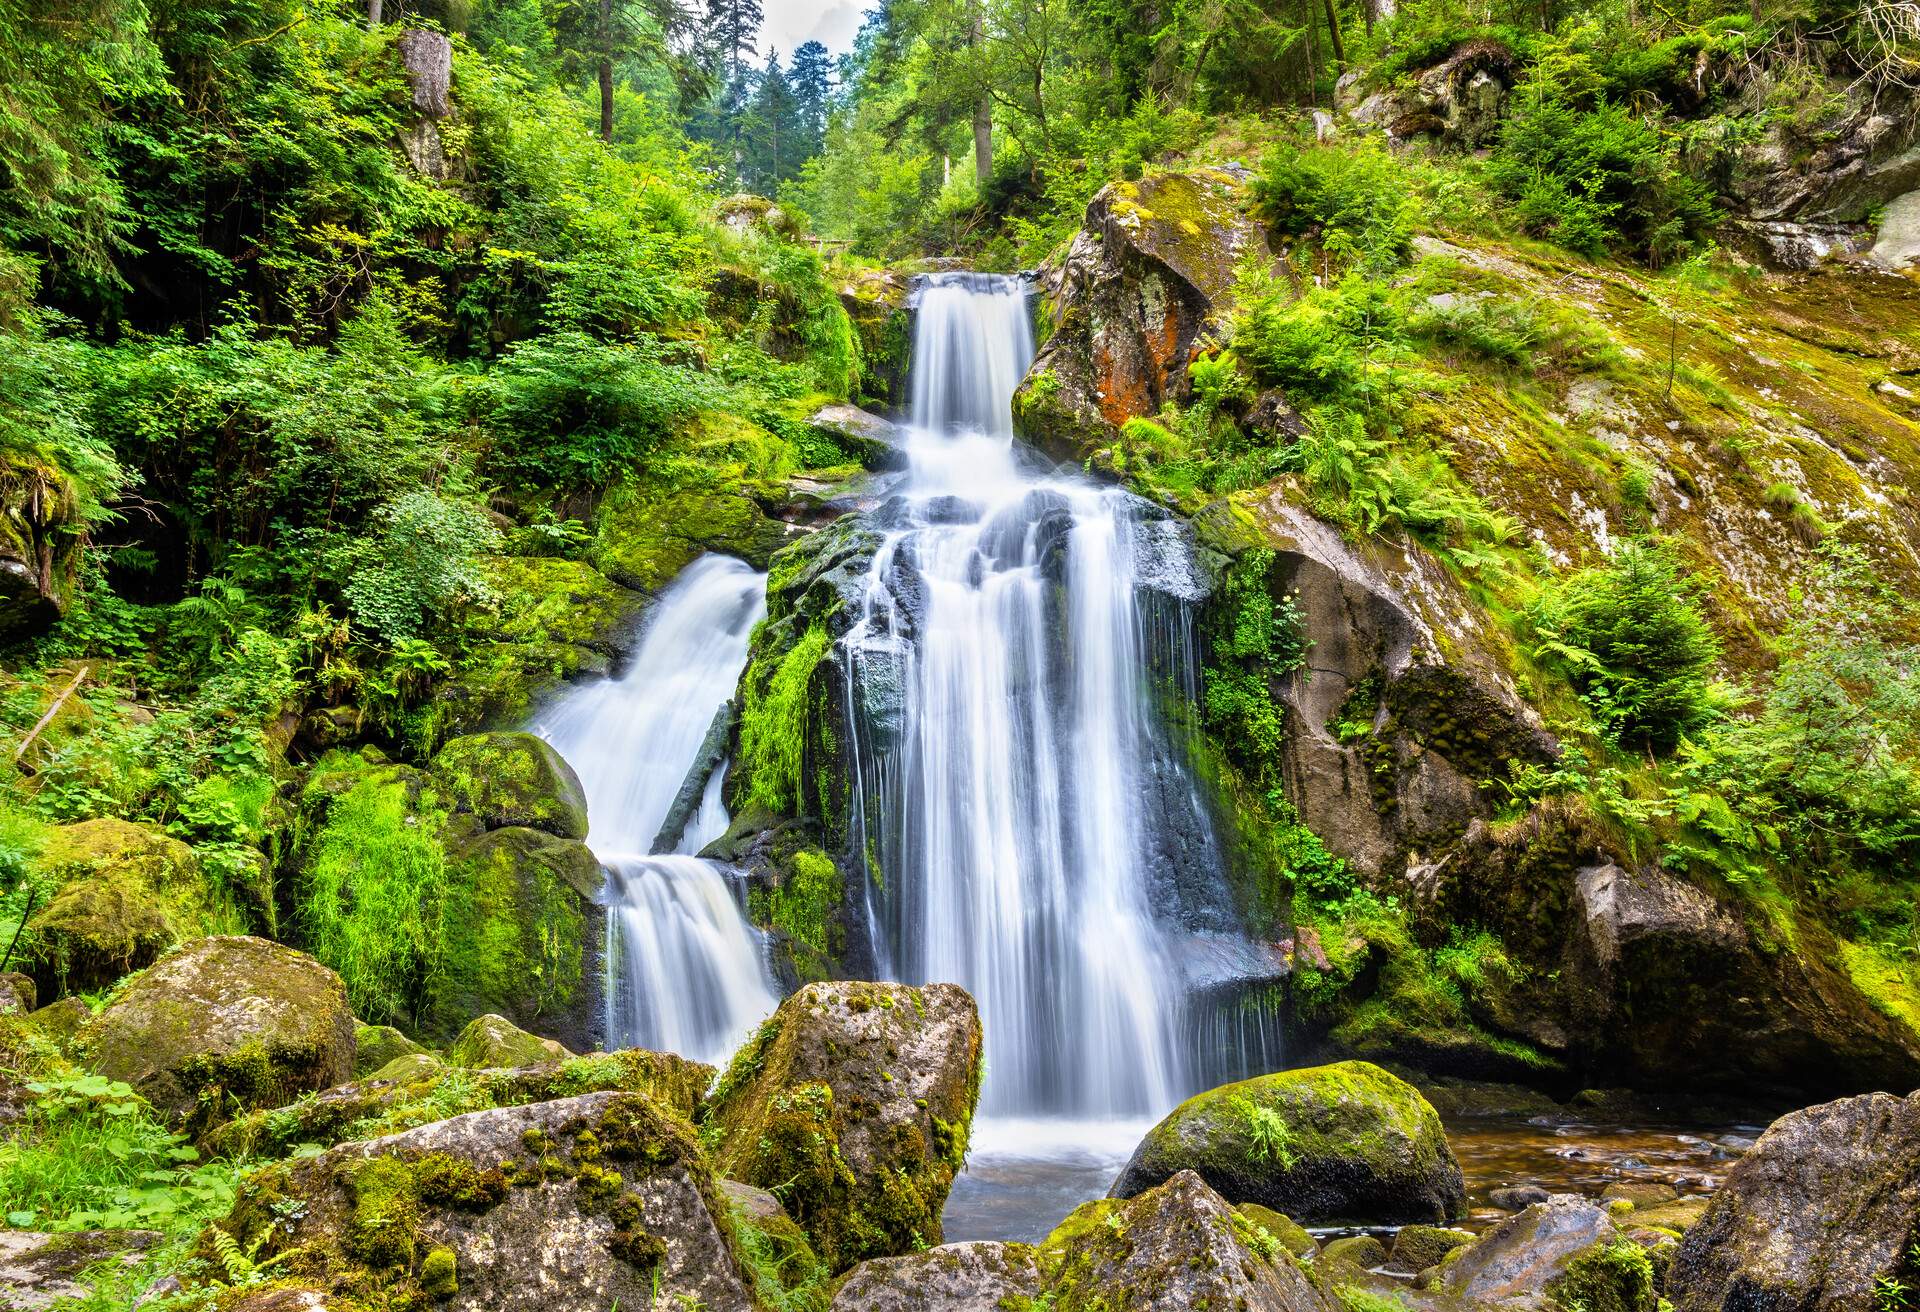 Triberg Falls, one of the highest waterfalls in Germany - the Black Forest region